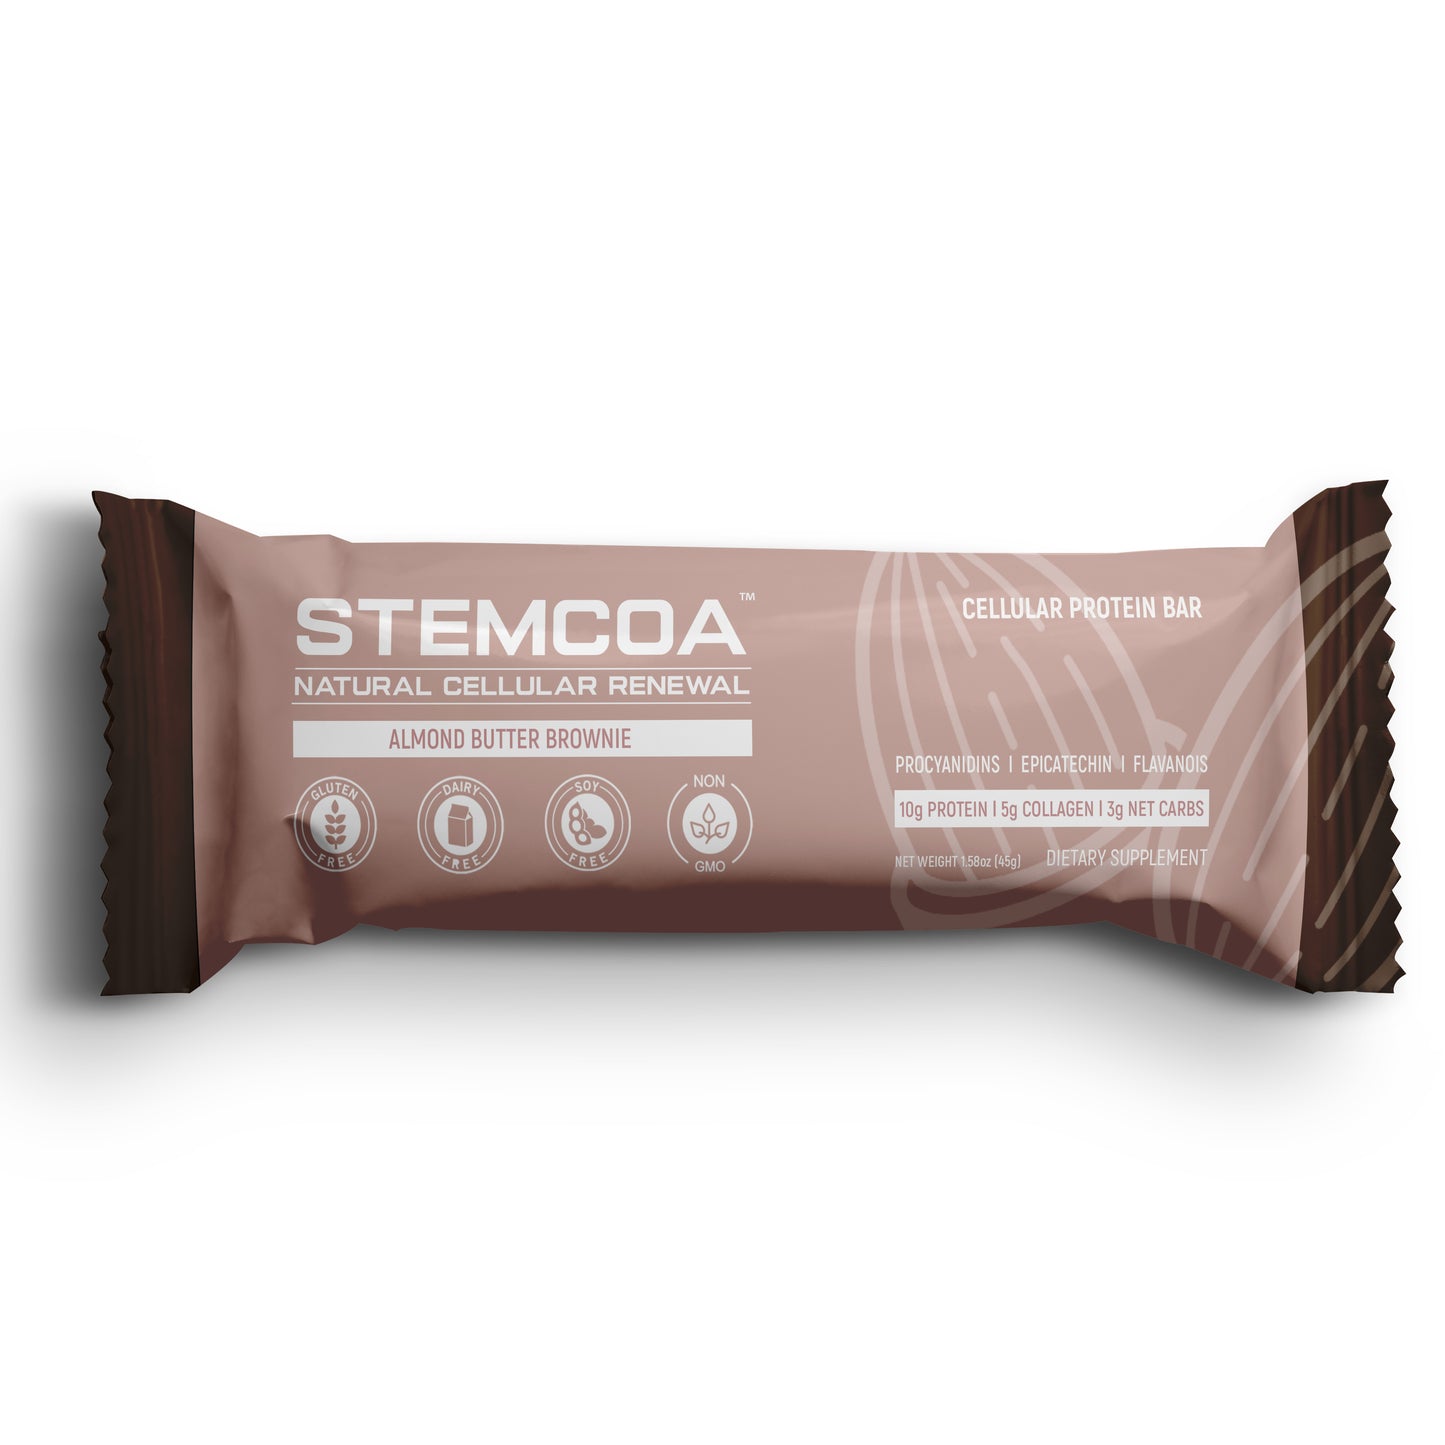 NCP1 - NEW CELLULAR PROTEIN BAR